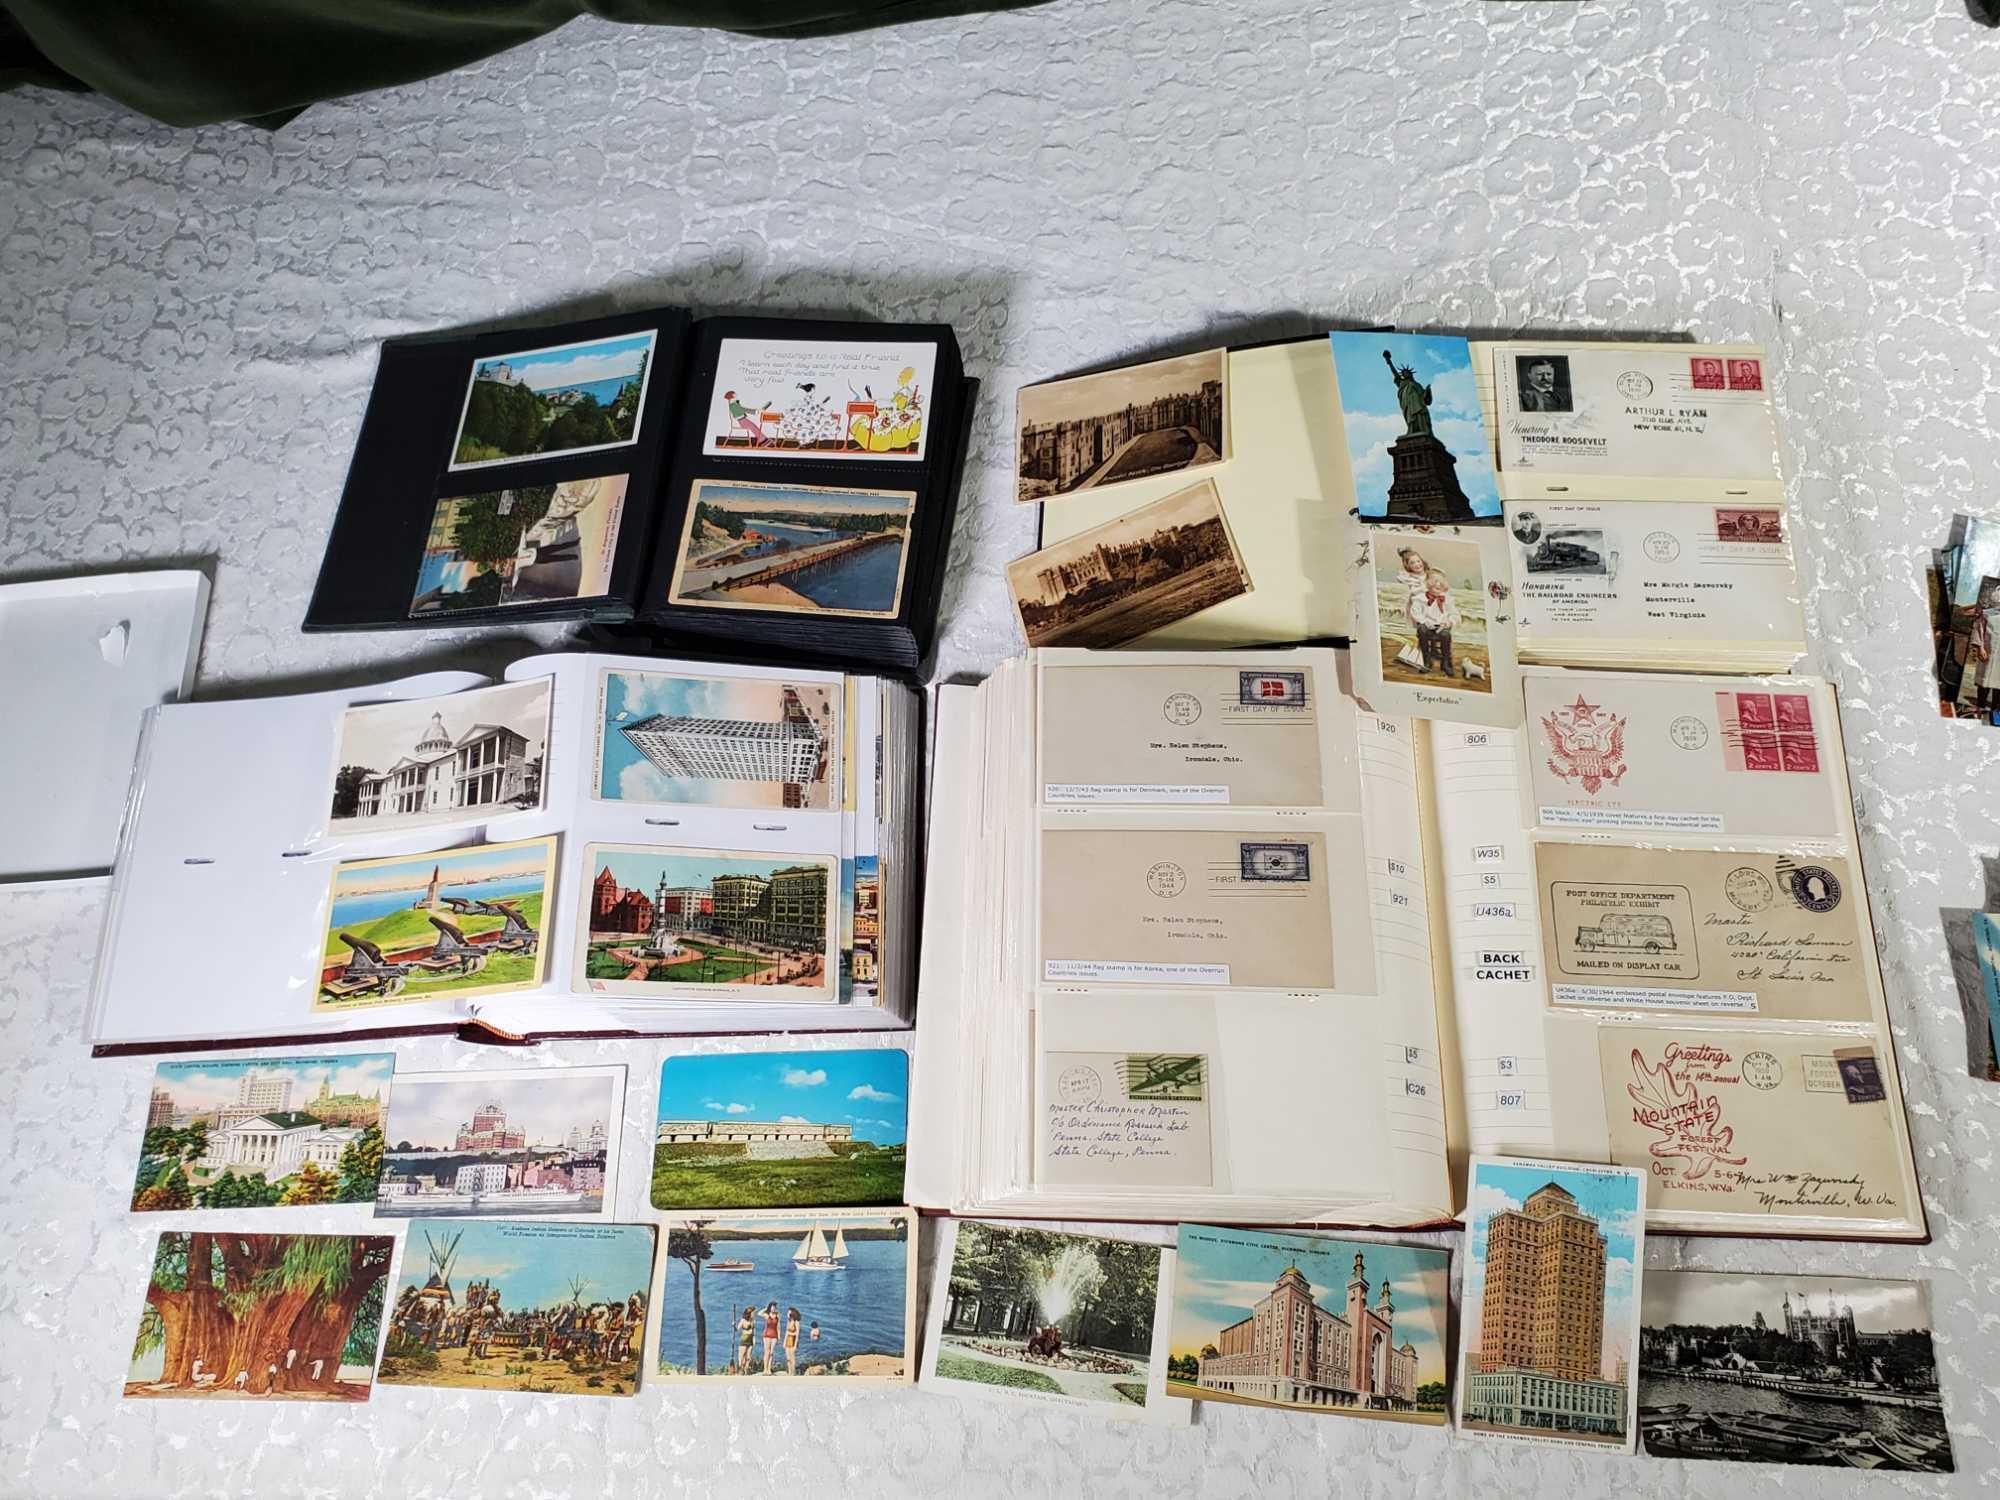 5 Albums of Vintage and Antique First Day Covers, Stamps, Postcards and Old Stock Certificates